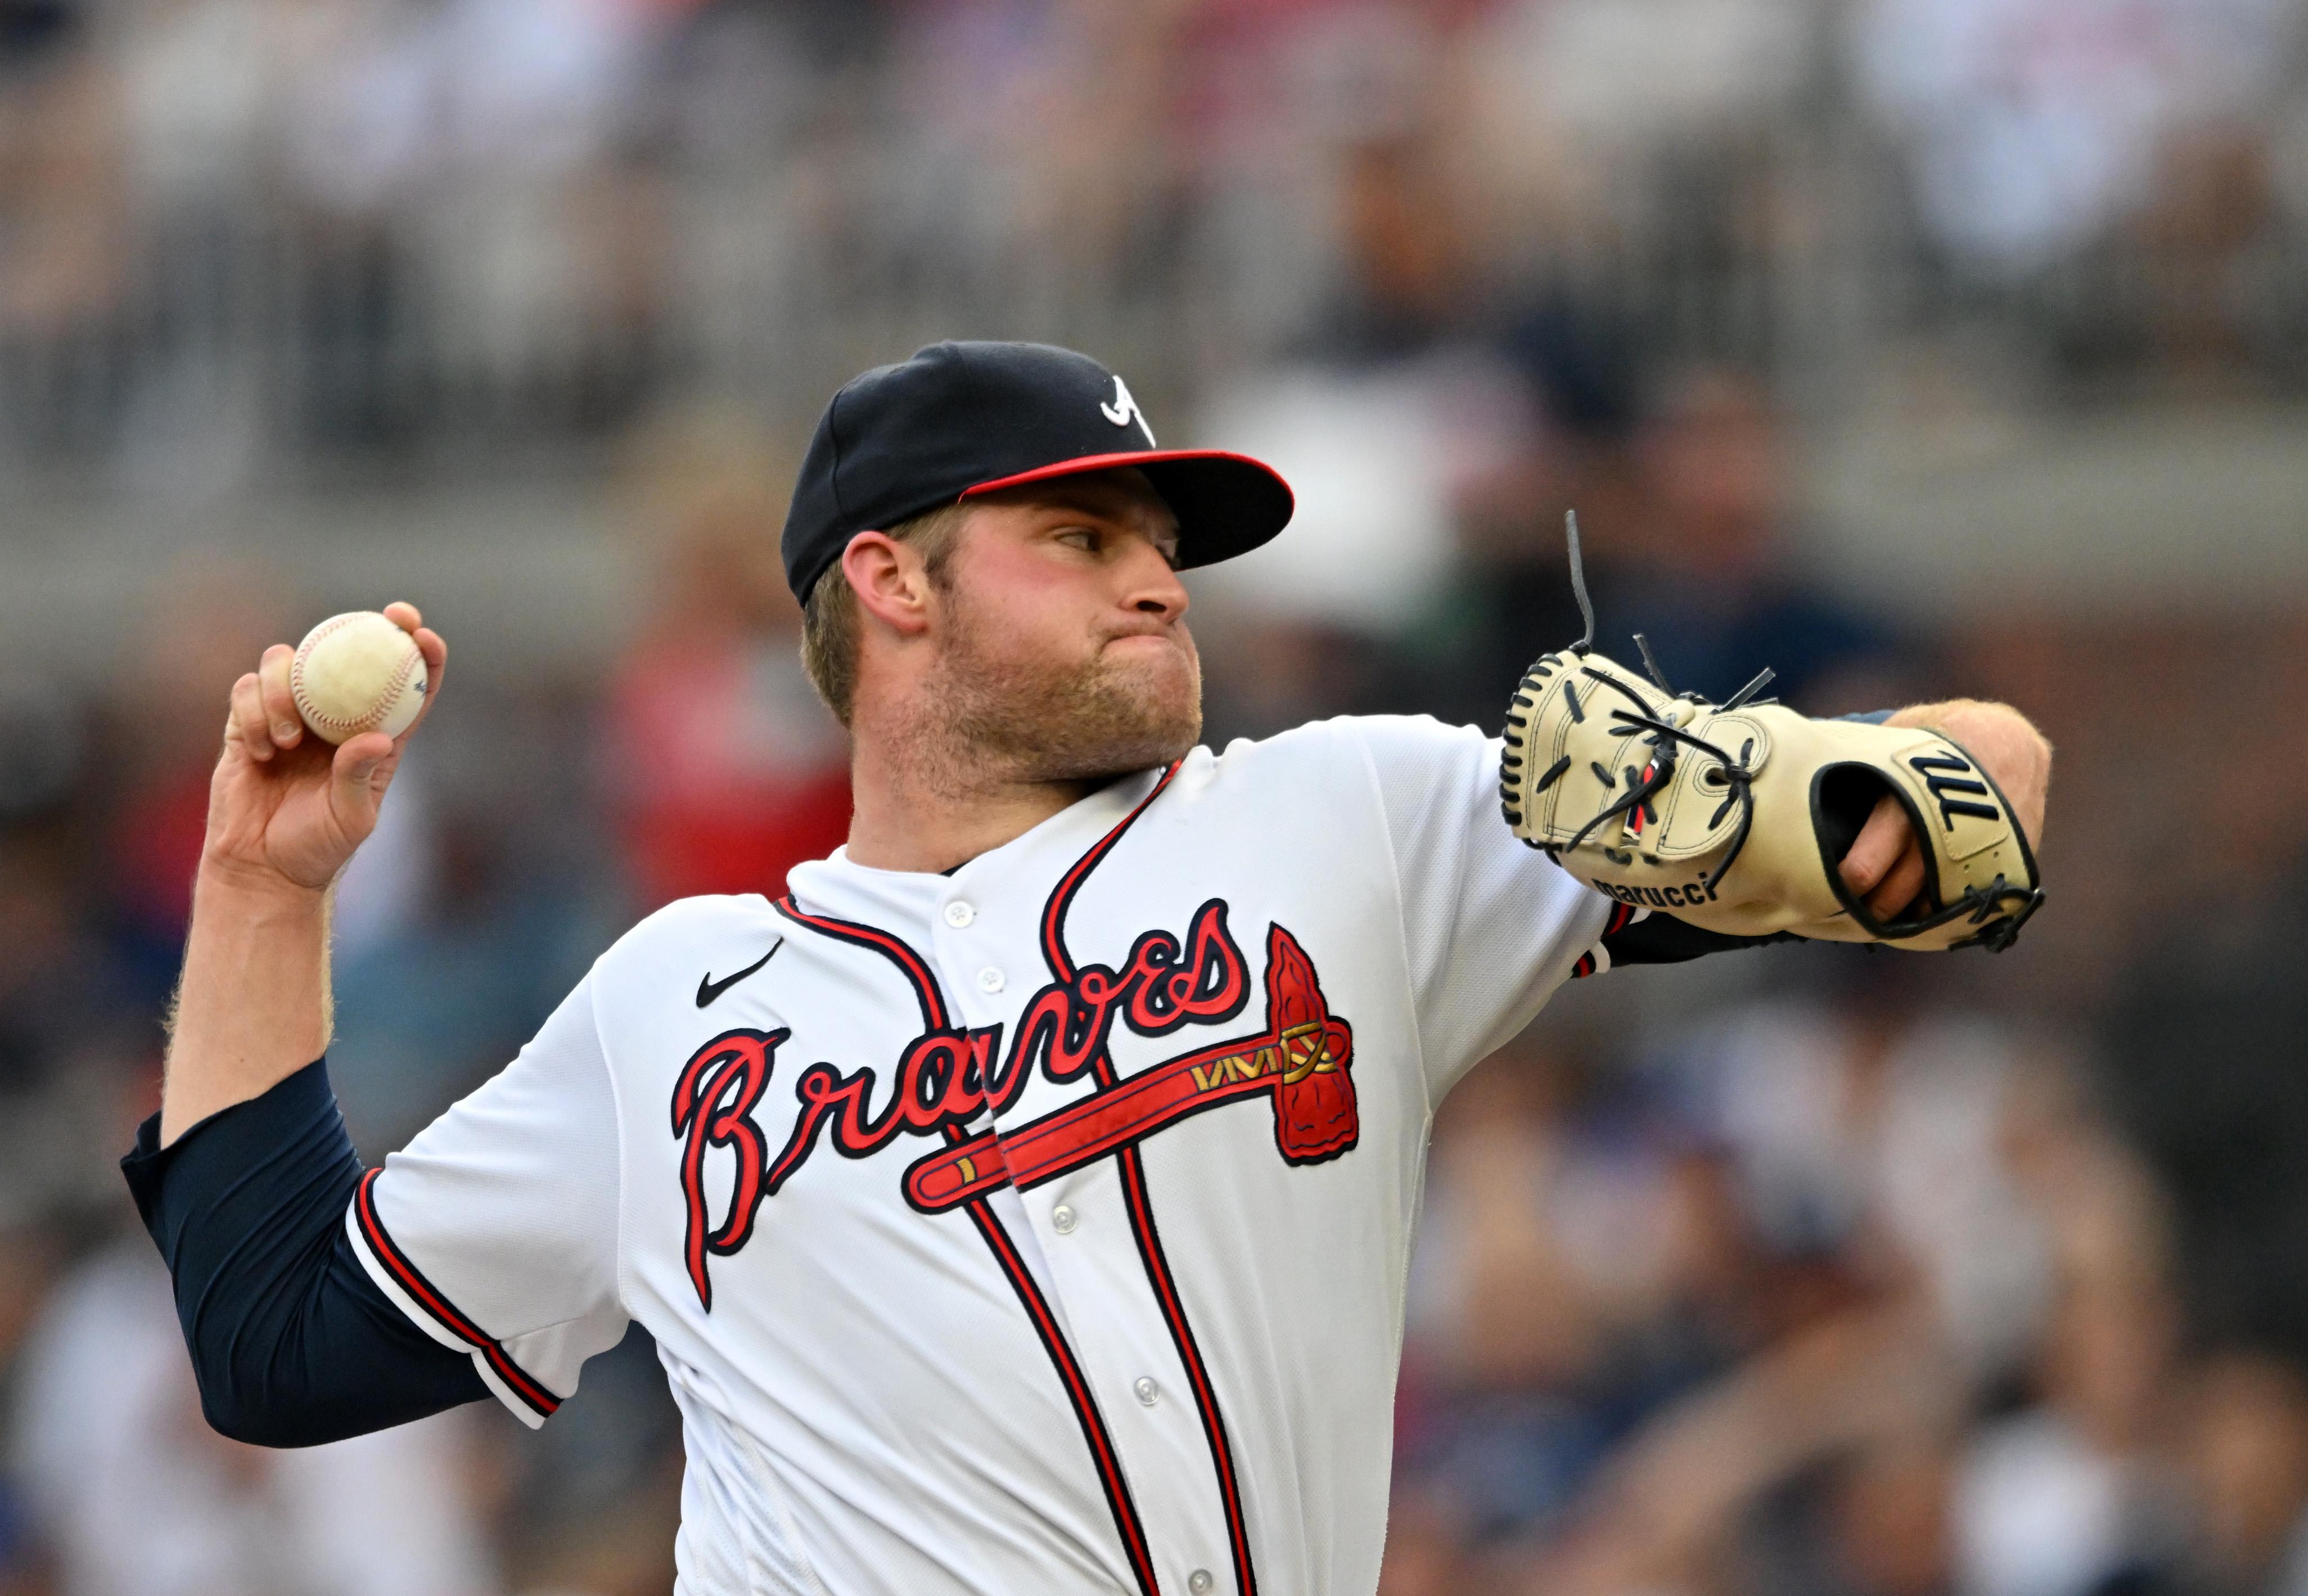 Acuña, Ozuna go deep as Braves hold slumping Yankees to just one hit in  easy 5-0 victory